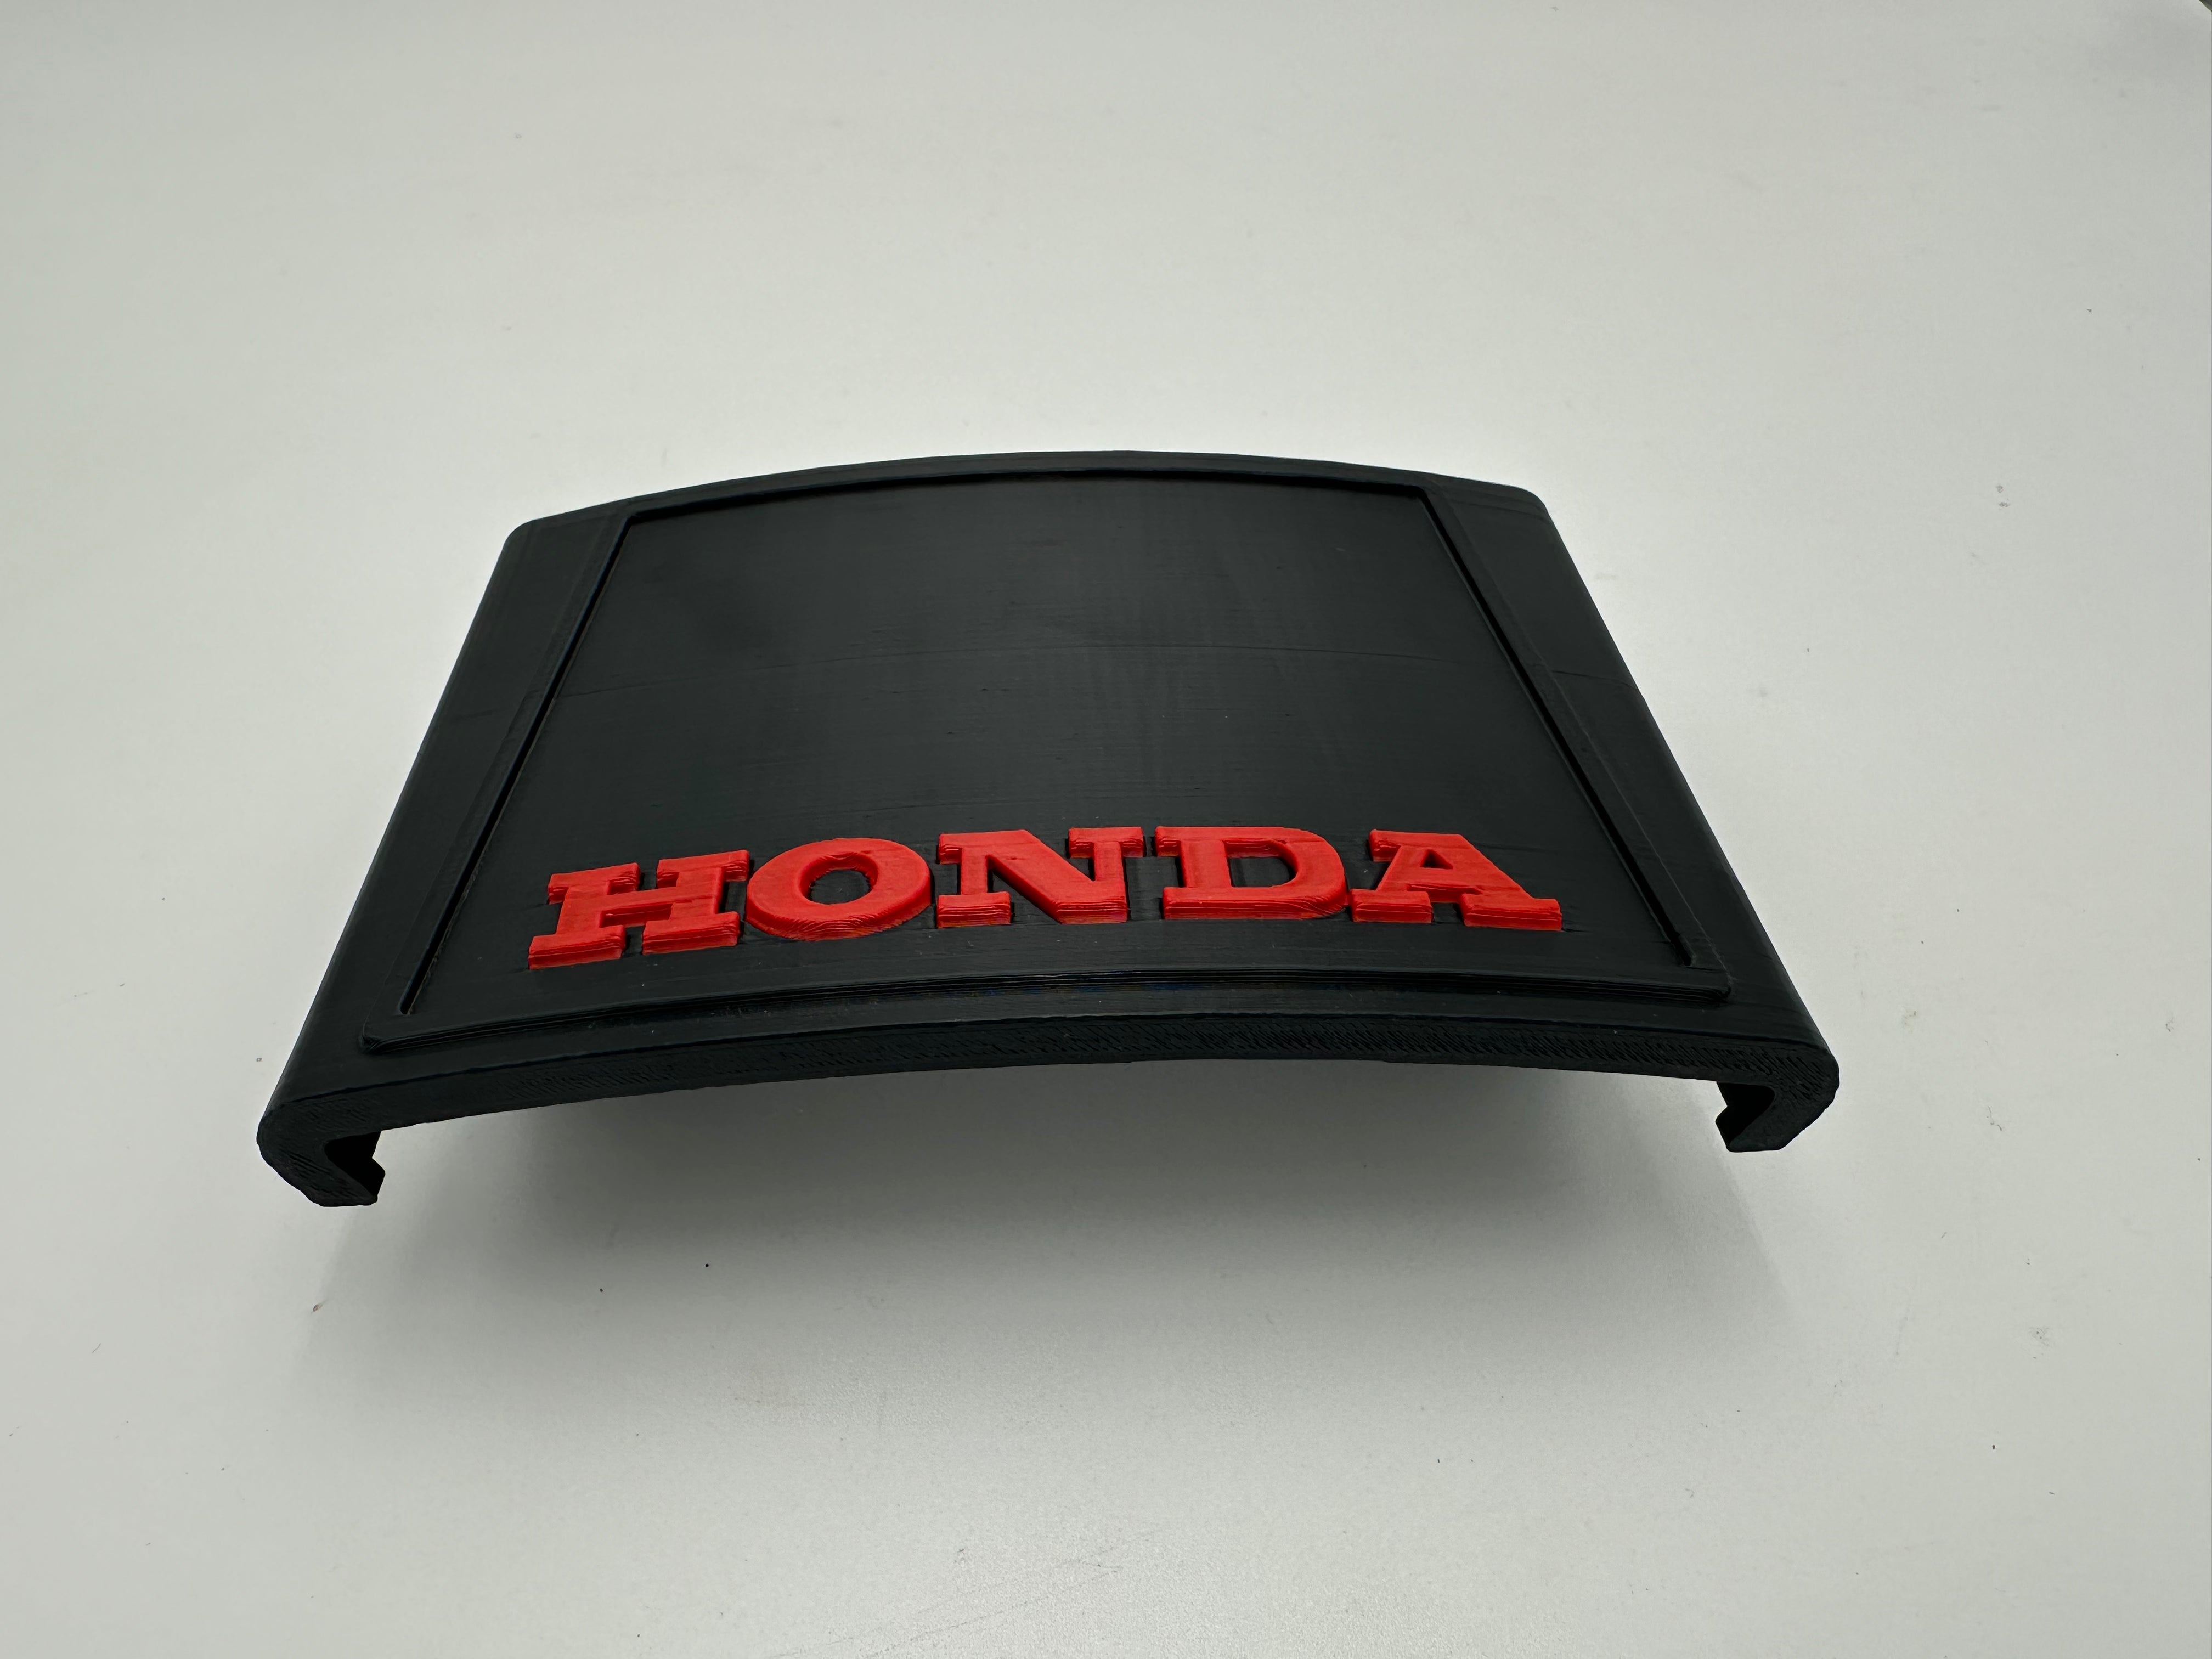 1978-1985 Honda ATC 70 3D Printed Black and Red Front Number Plate